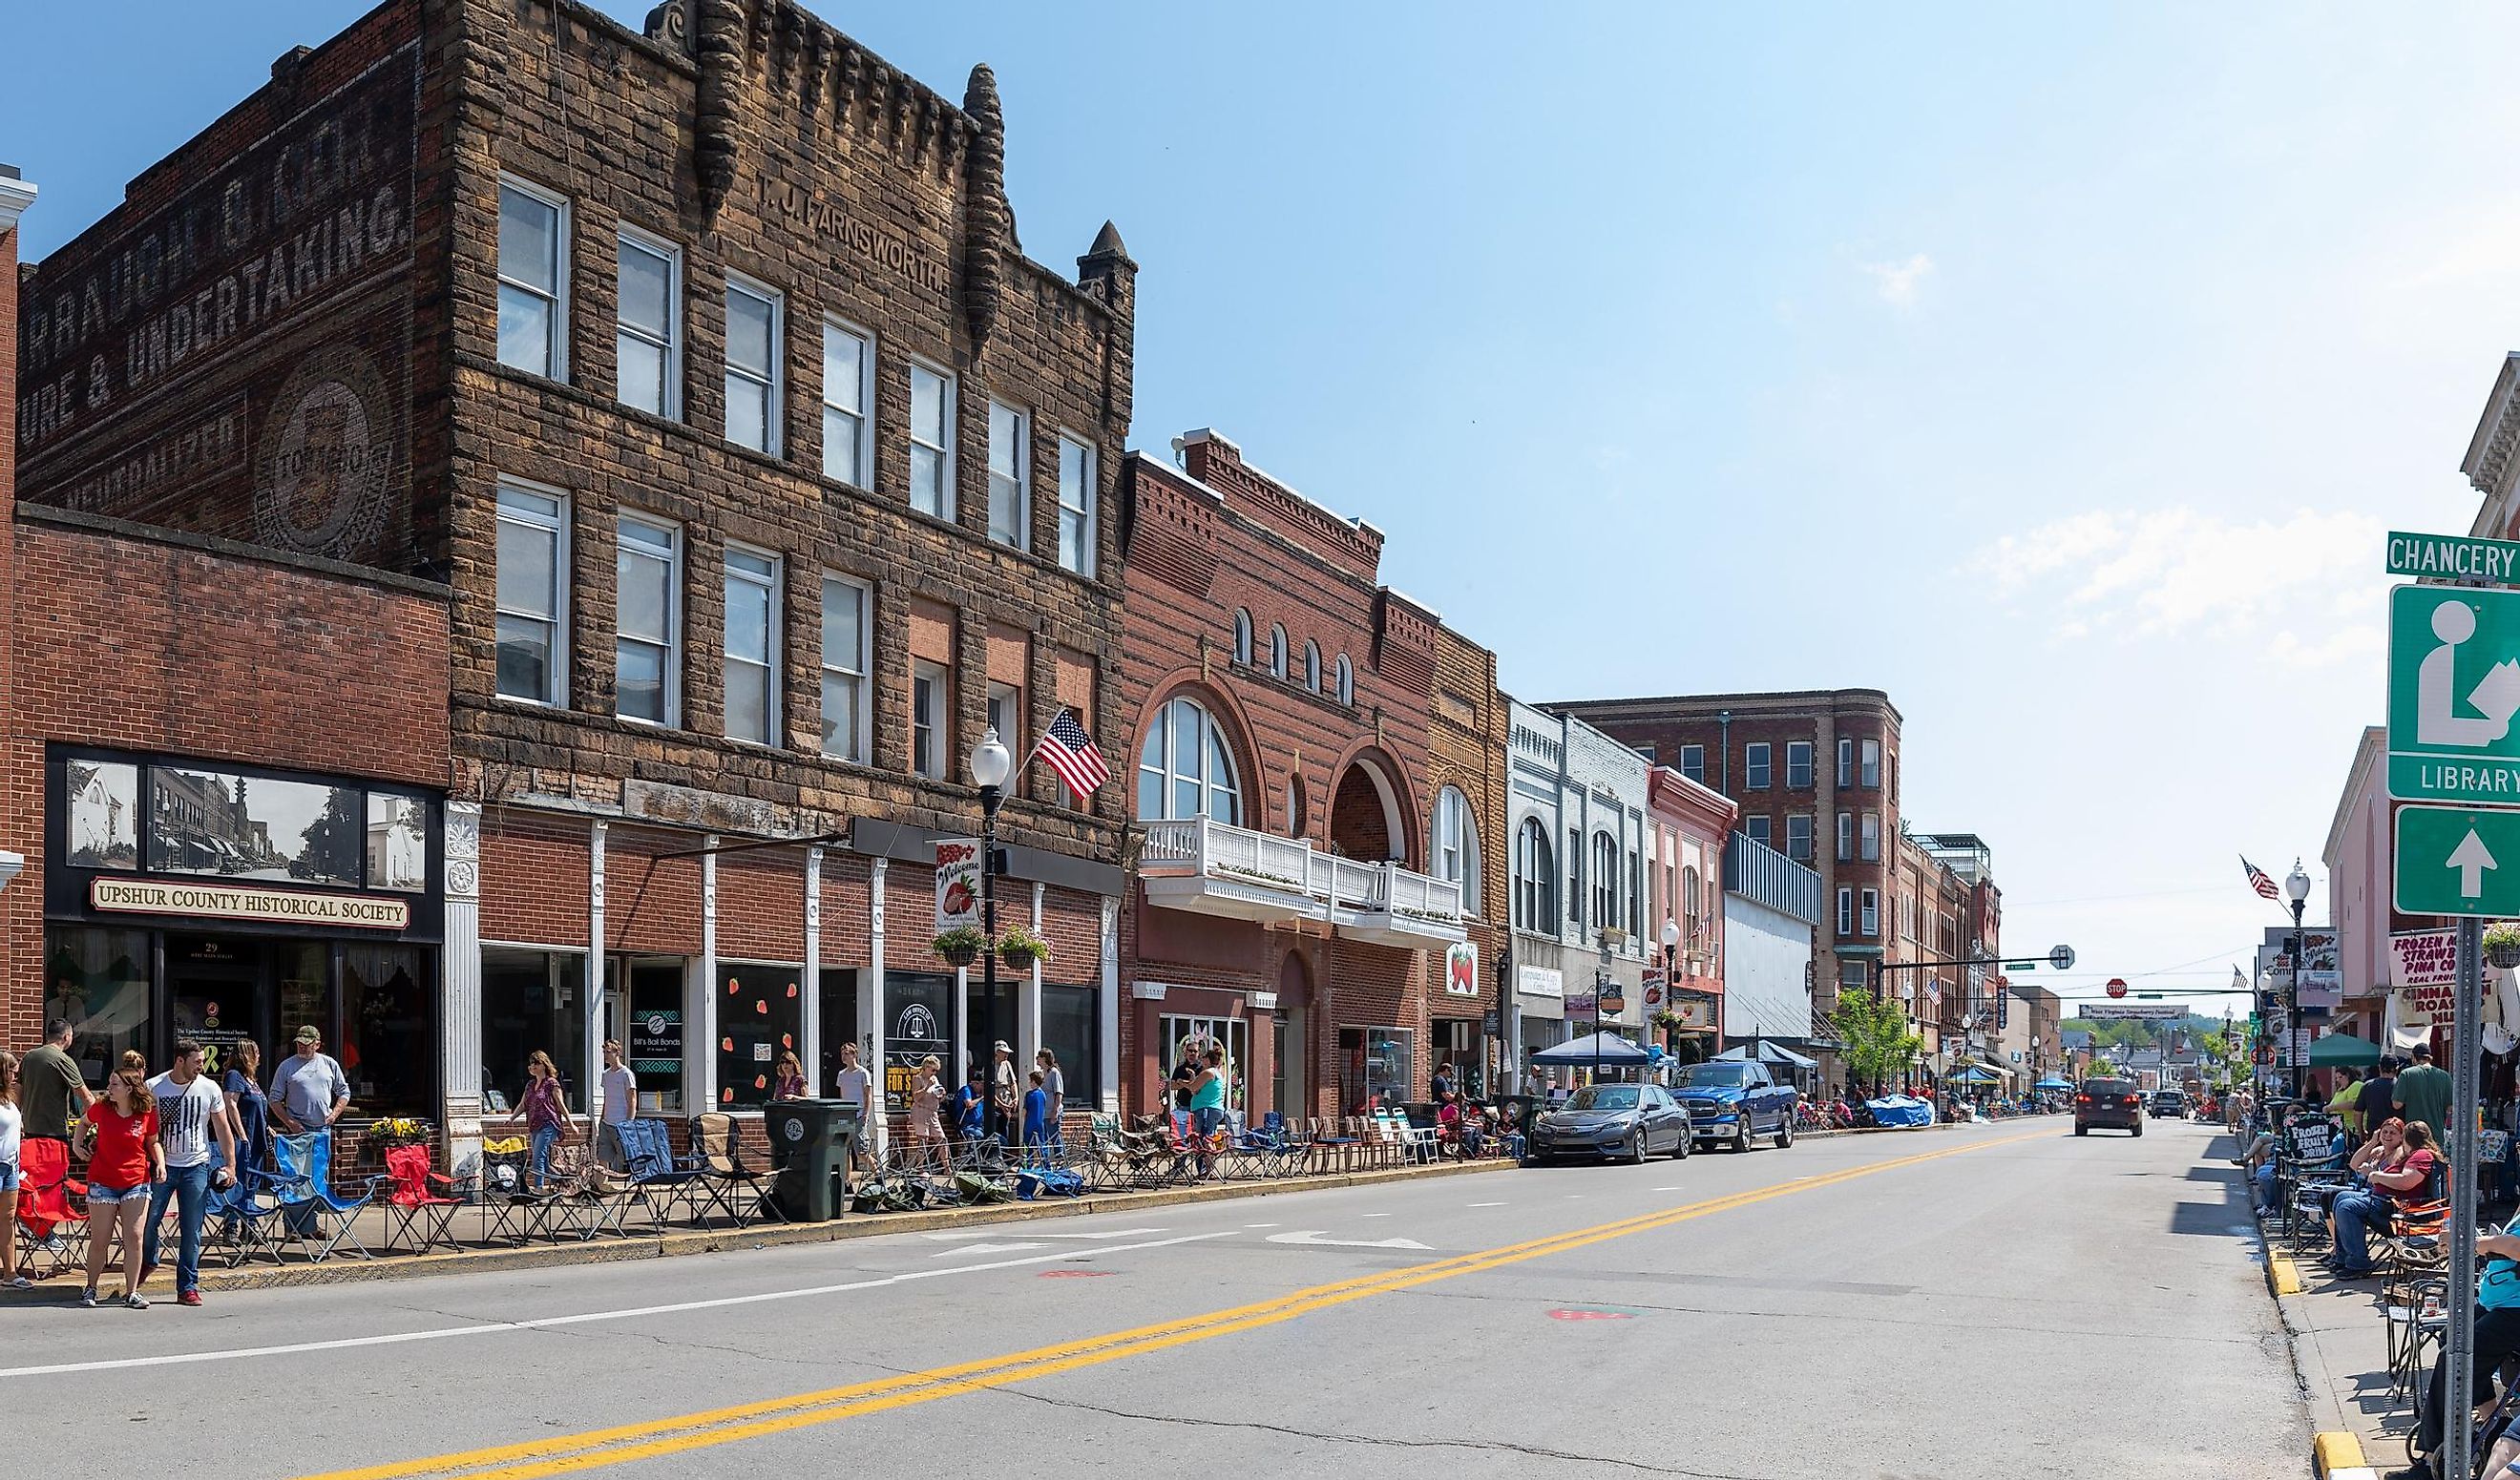 Buckhannon, West Virginia, USA - May 18, 2019: The Historic Building along Main Street, with locals and tourist walking along, waiting for the parade